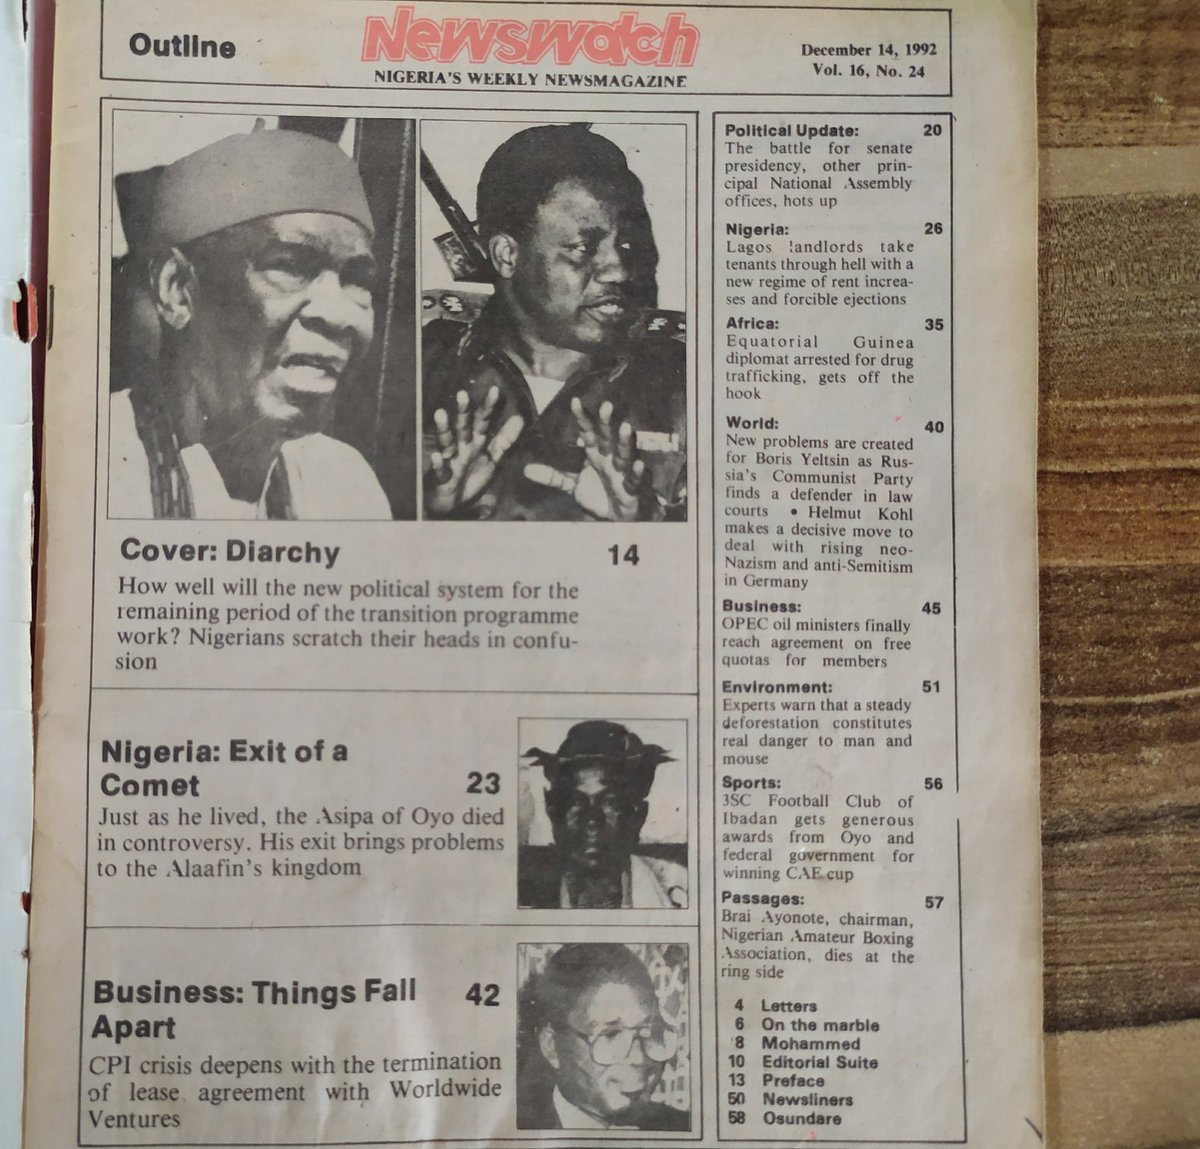 Newswatch and Citizen were the anchors for many in the military era. They were unbiased reports of truth found by dilligent investigative reporting. These are from 1992. The one with Gen. Abdulsalami on the cover is from 1998.